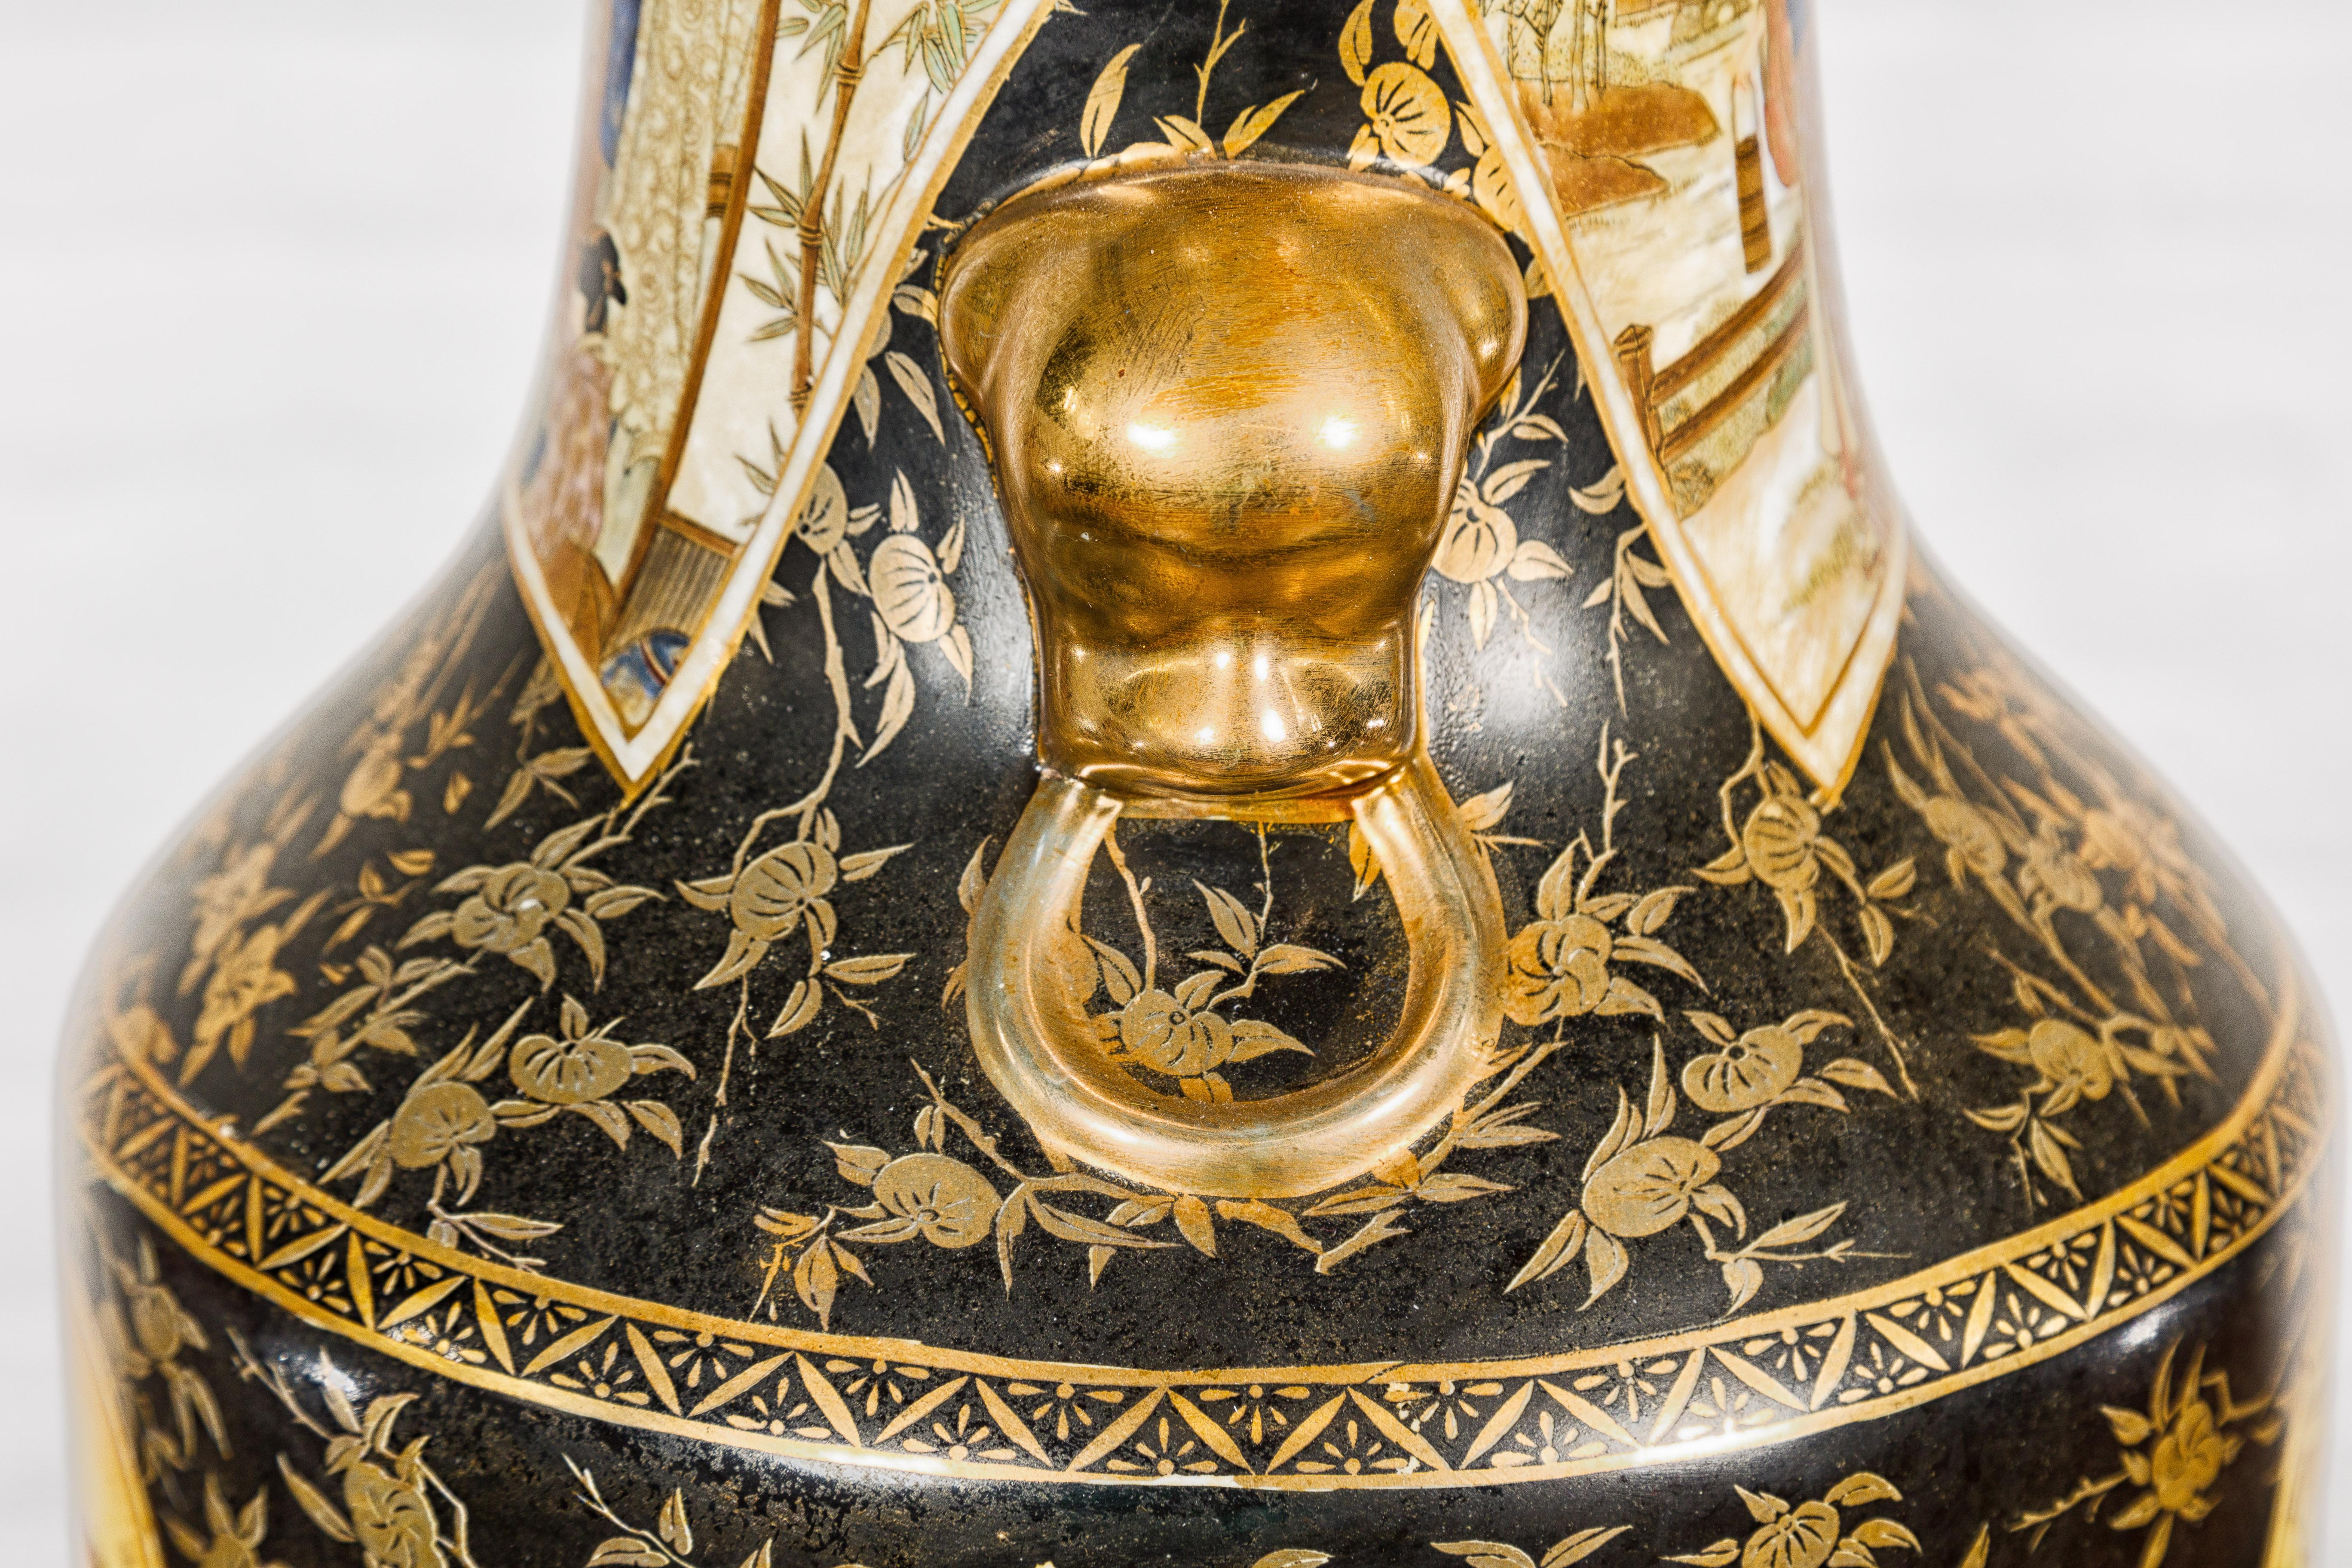 Japanese Inspired Black and Gold Vase with Family Scenes and Foo Dog Handles For Sale 4